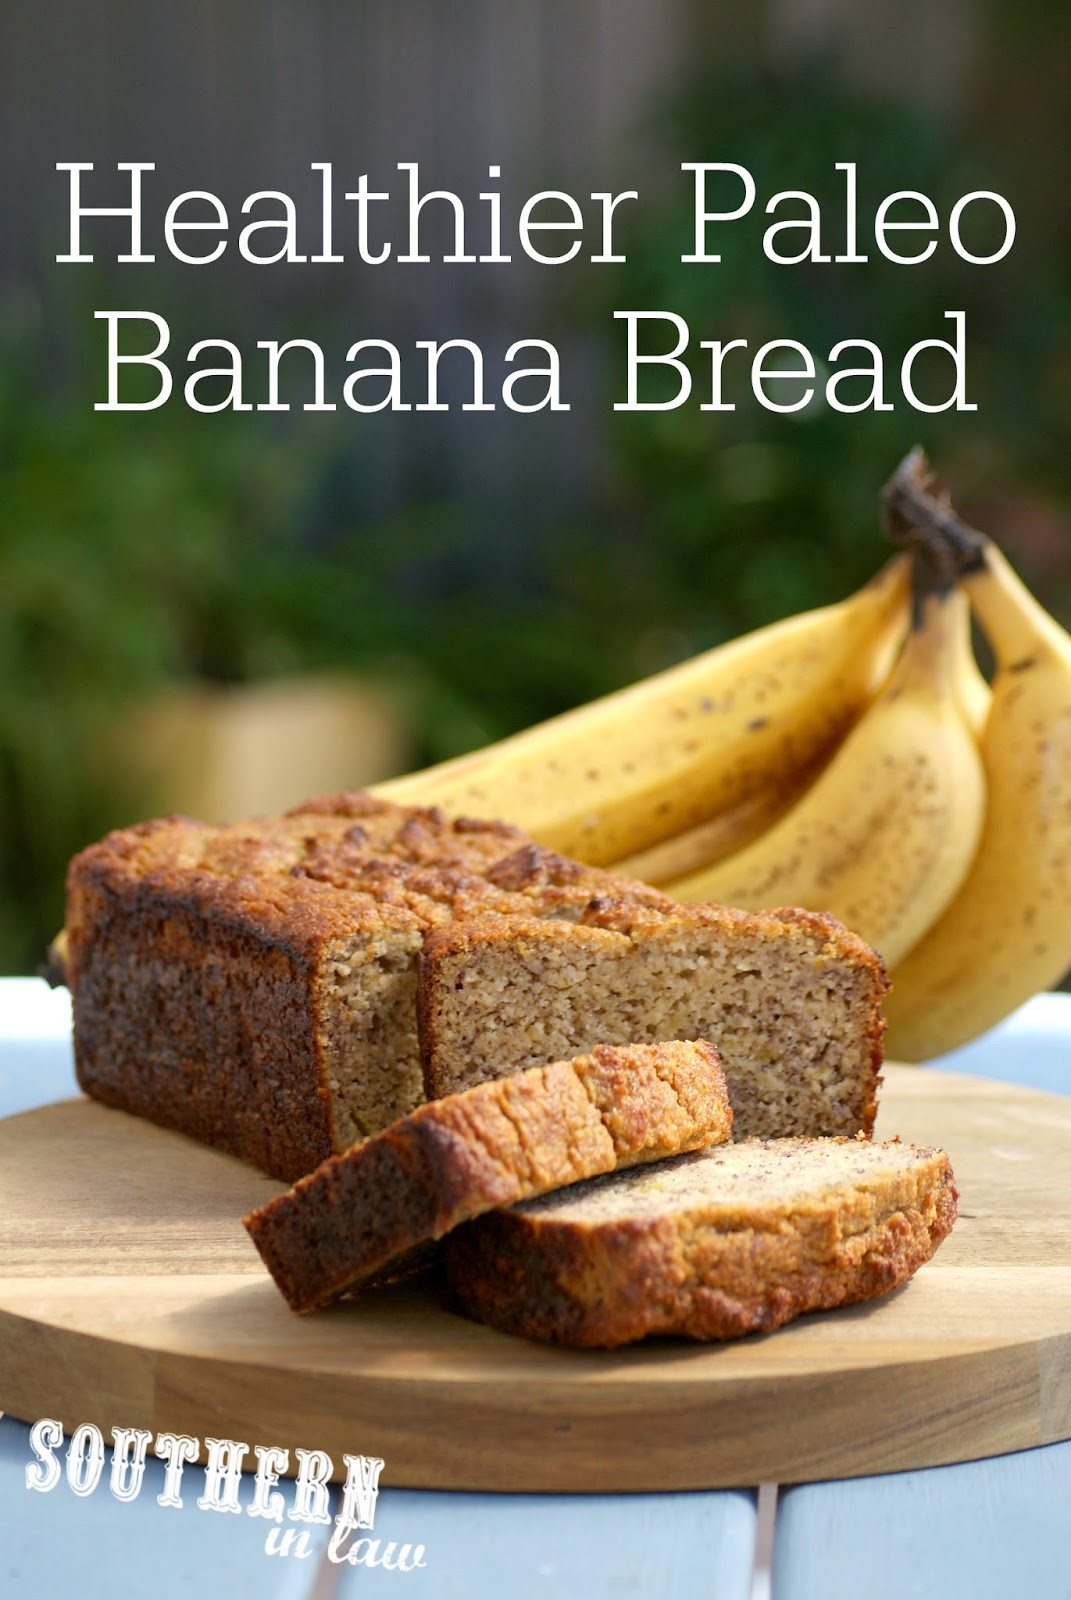 Low Carb Bread Recipes Healthy
 Southern In Law Recipe The Best Healthy Paleo Banana Bread